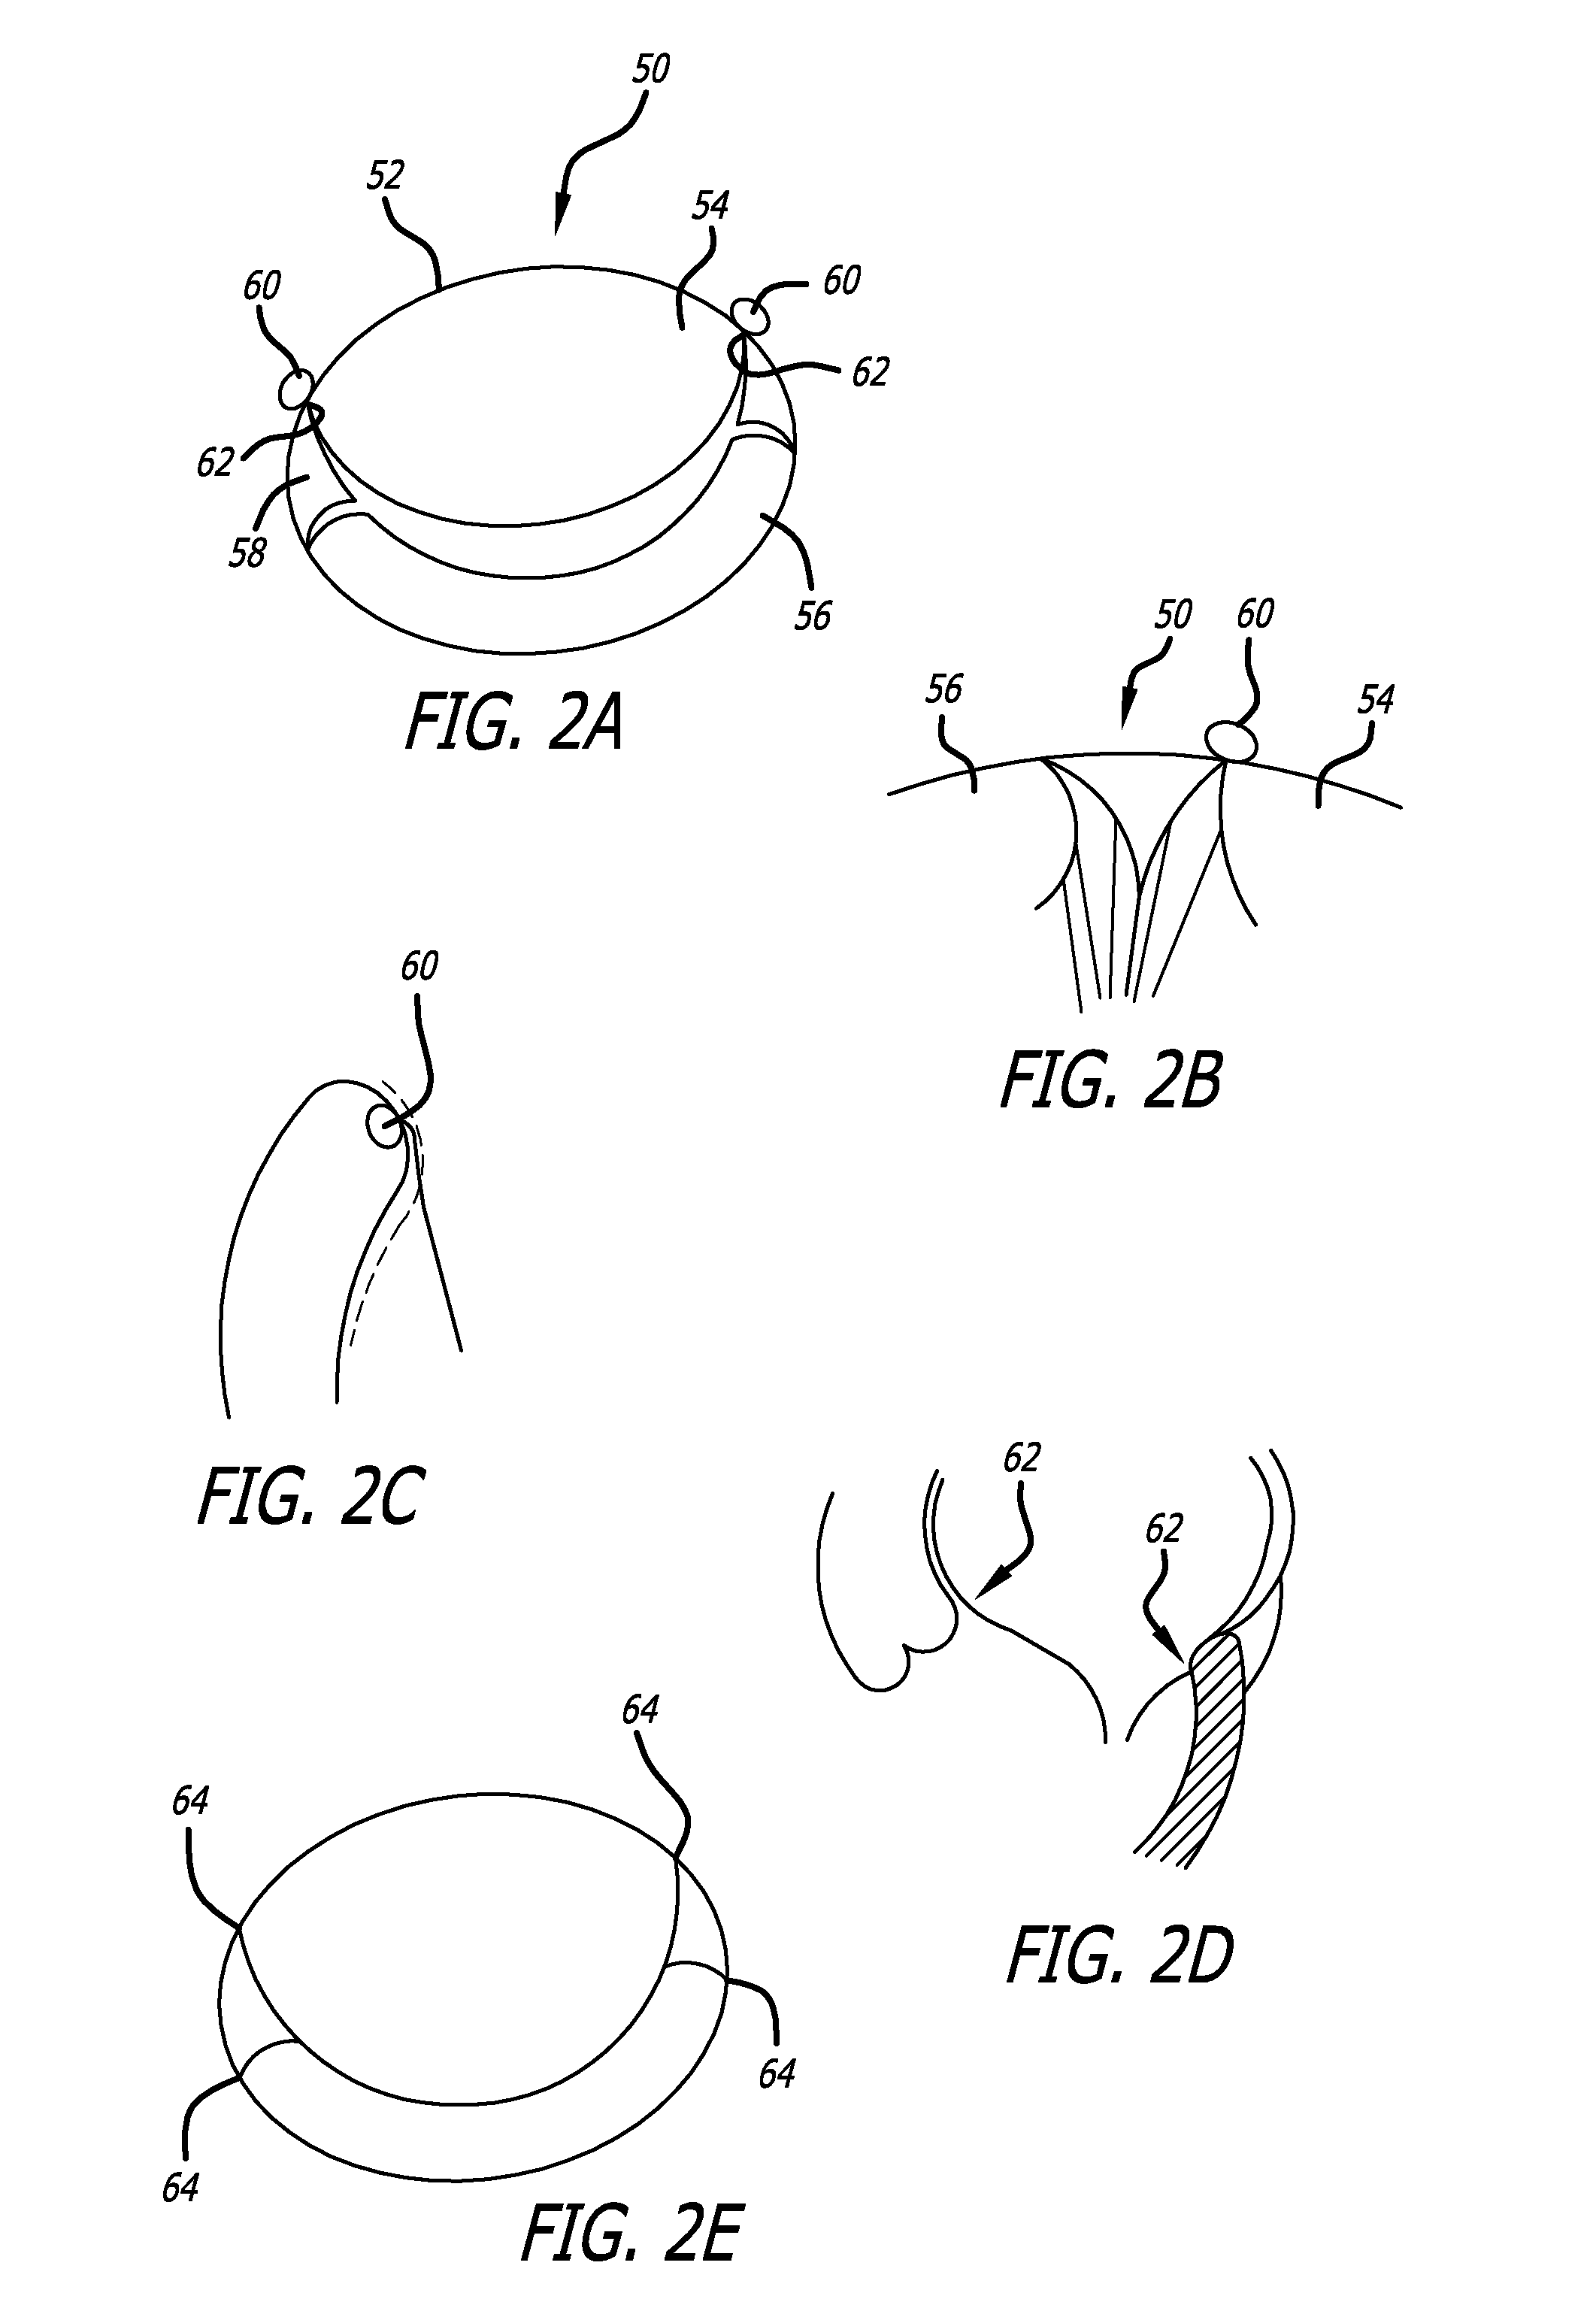 Valve replacement systems and methods